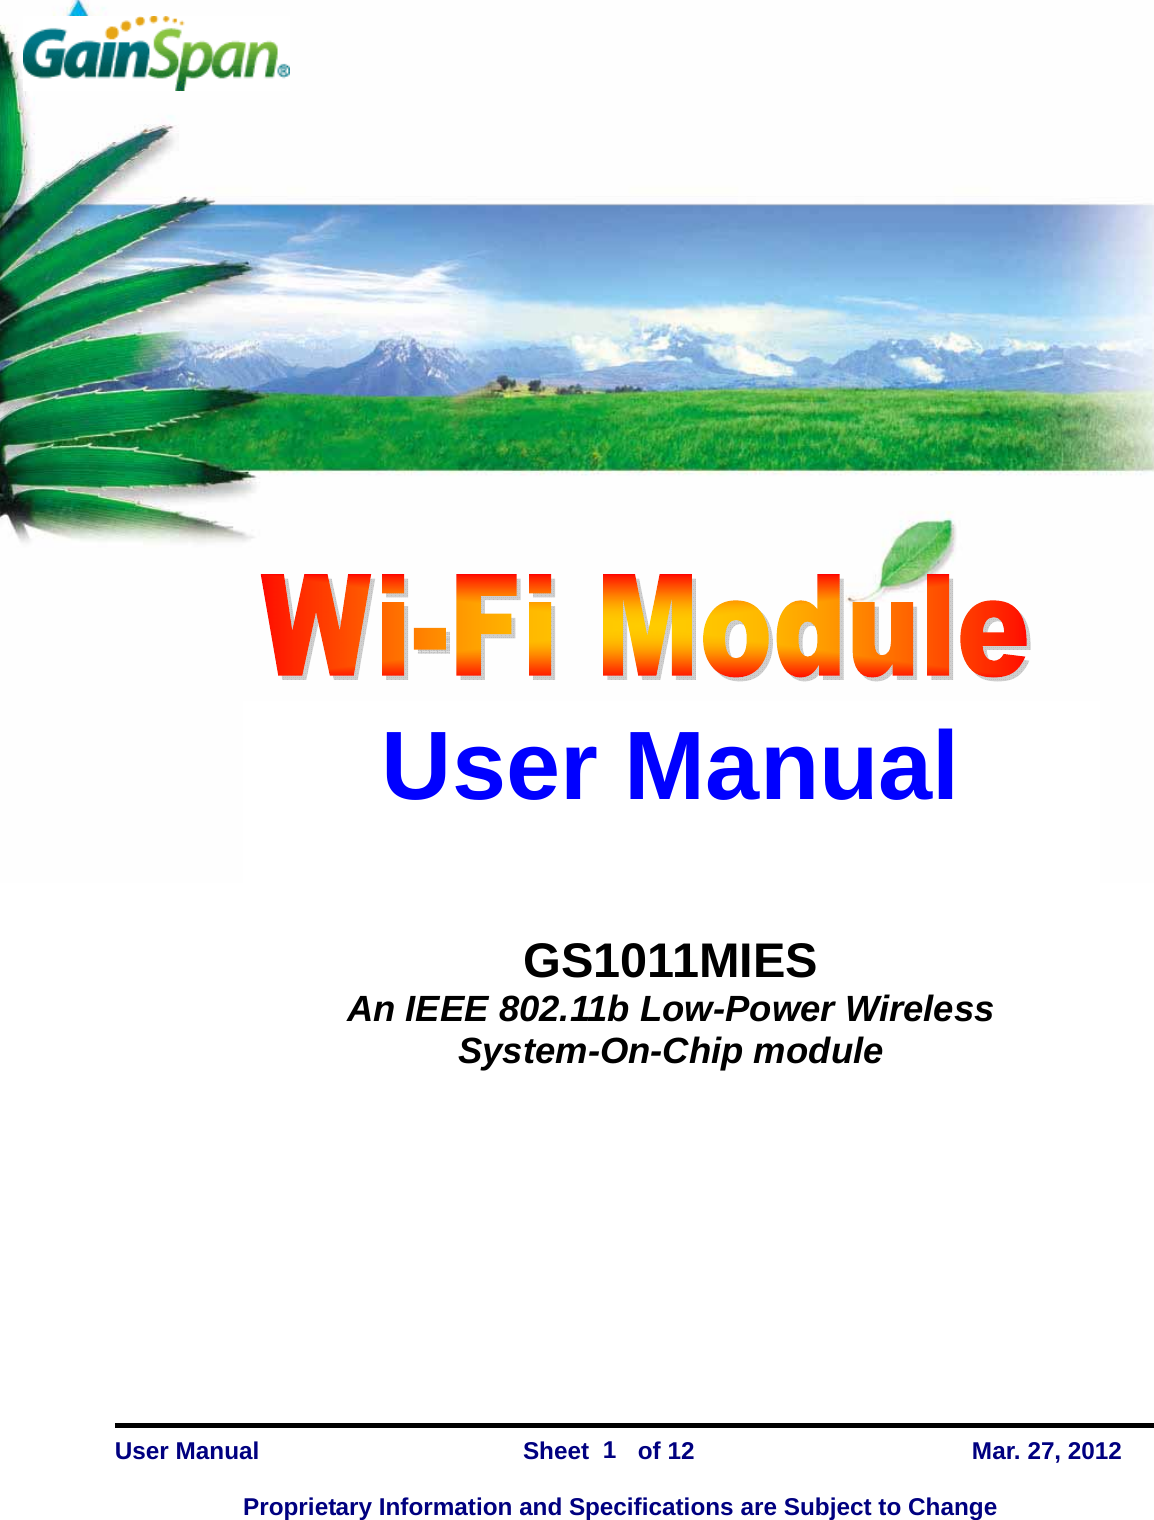   GS1011MIES    User Manual                Sheet    of 12      Mar. 27, 2012  Proprietary Information and Specifications are Subject to Change 1  User Manual   GS1011MIES An IEEE 802.11b Low-Power Wireless System-On-Chip module 